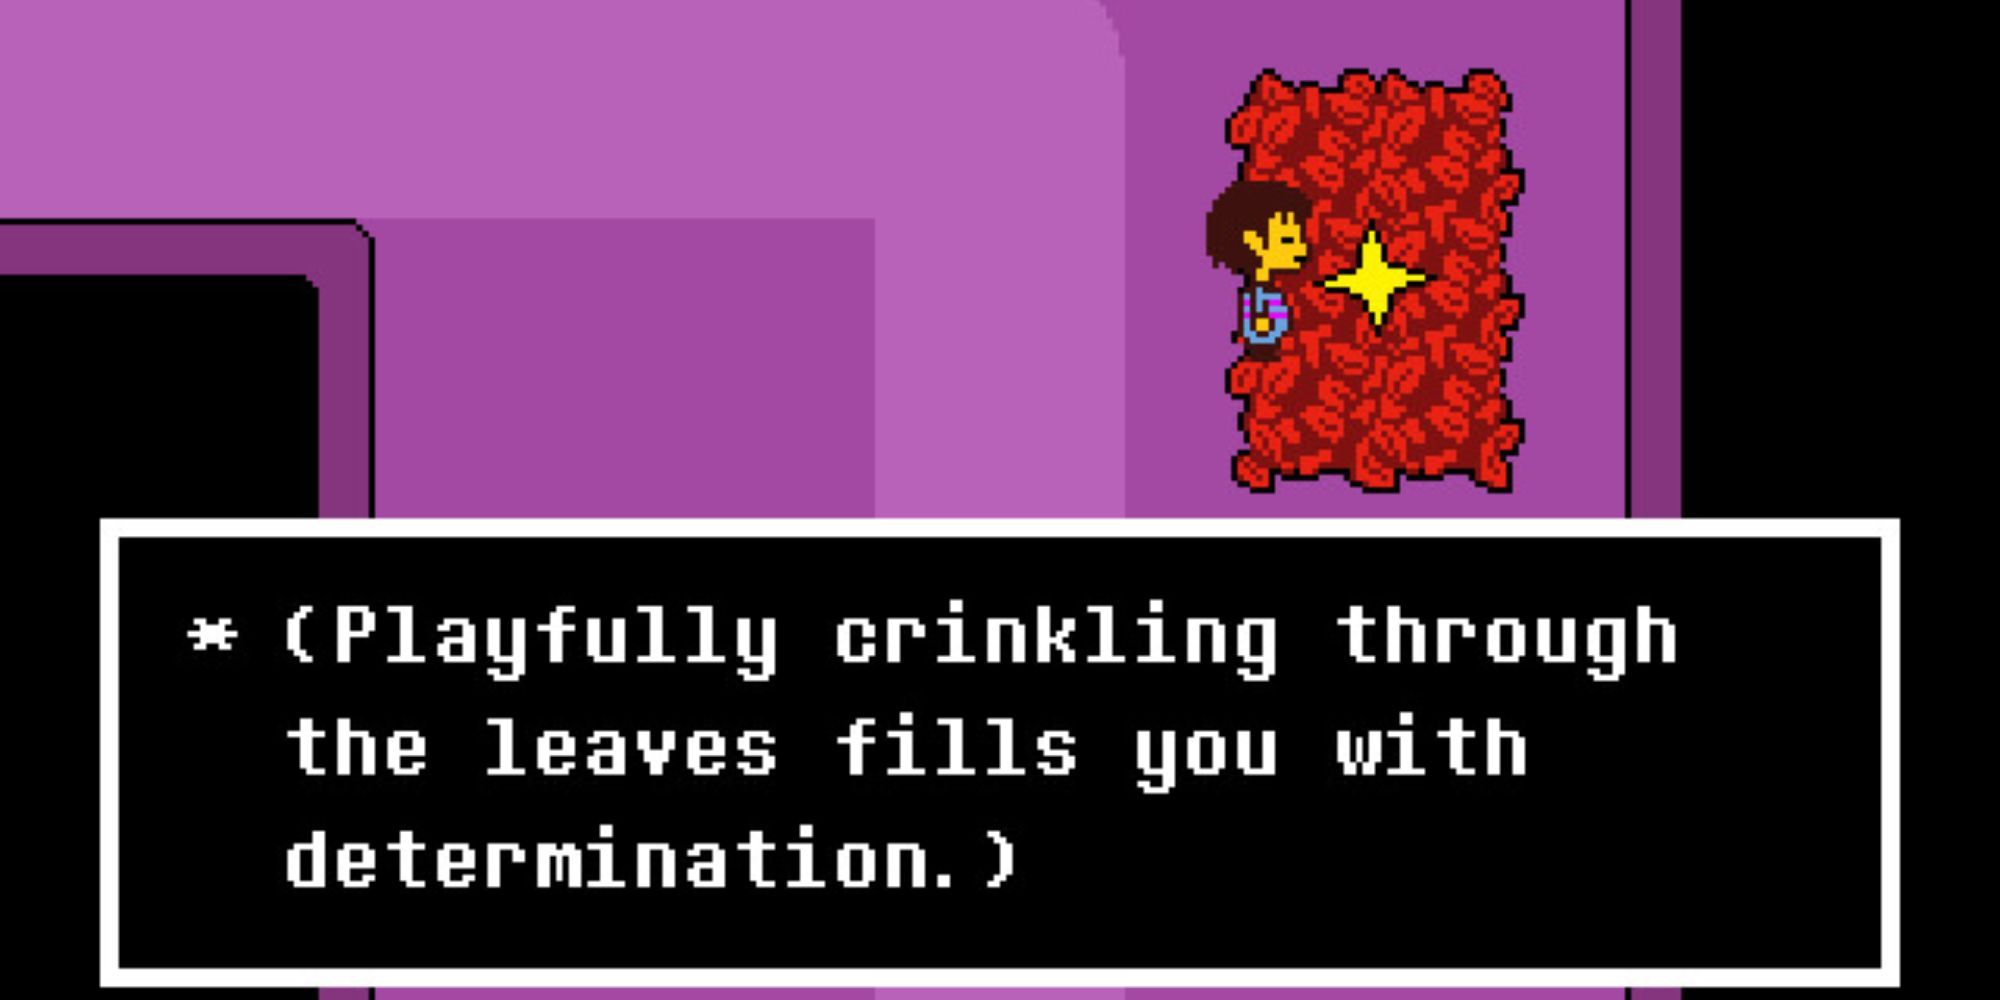 Frisk crinkles through the leaves at the beginning of the game